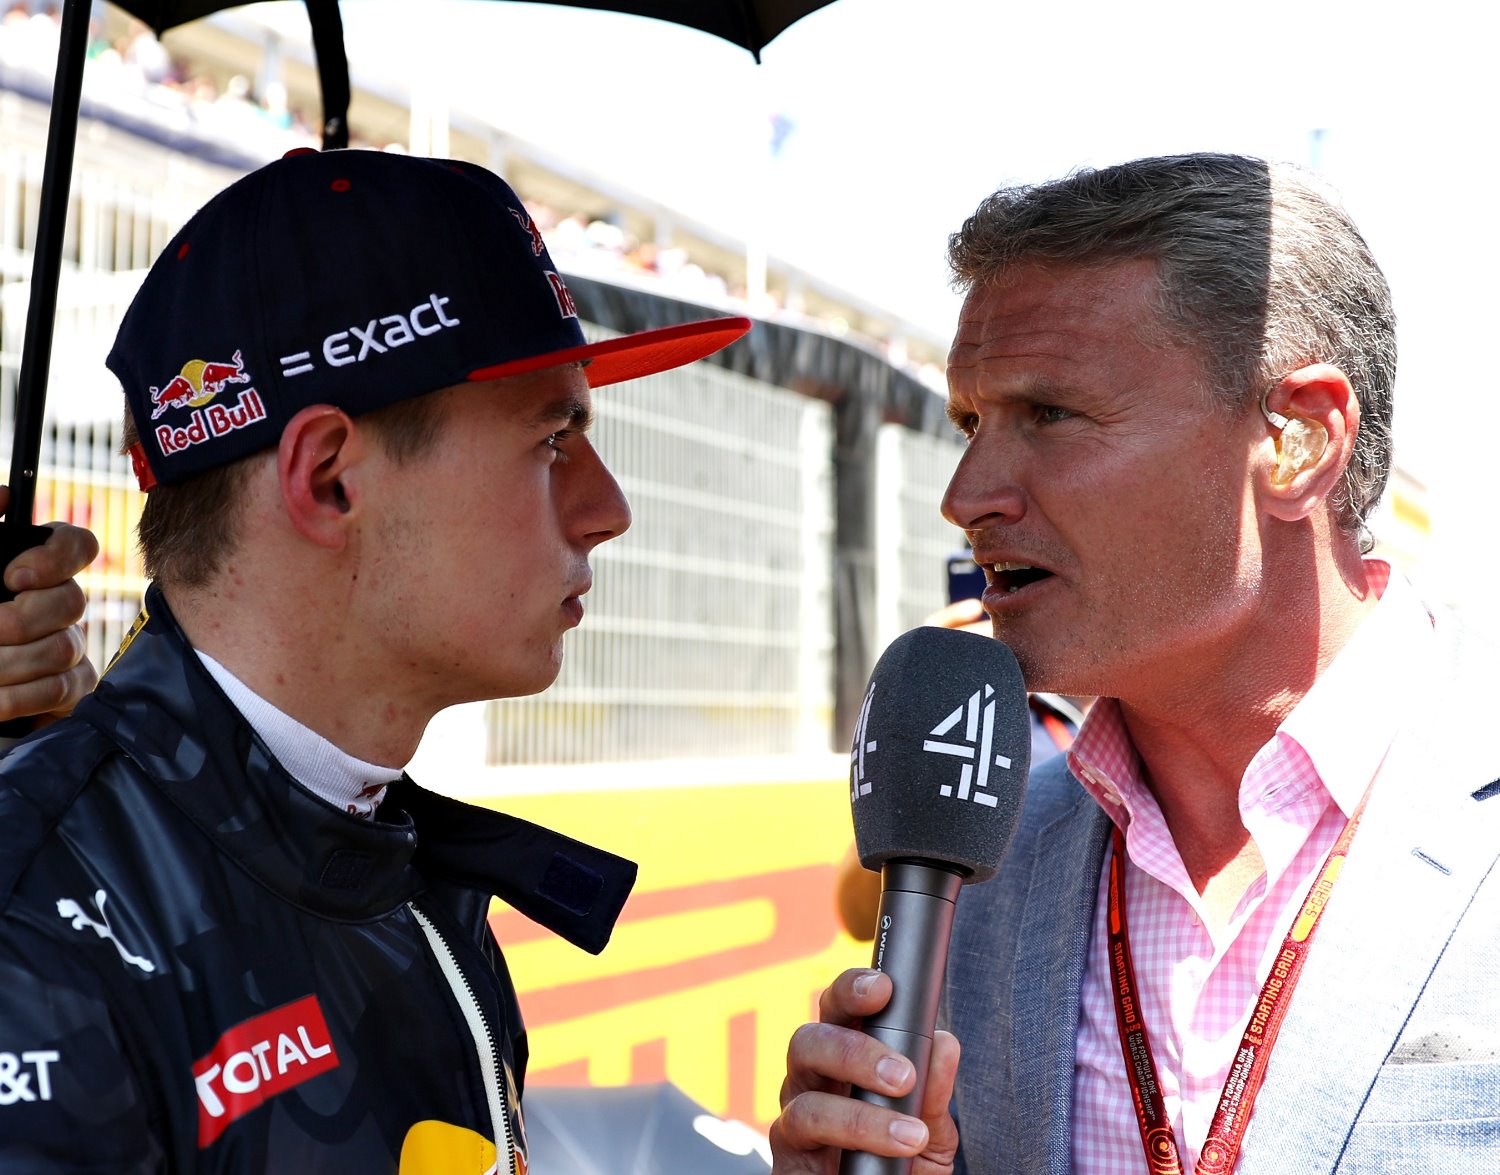 David Coulthard interviews Verstappen prior to the start of the Spanish GP